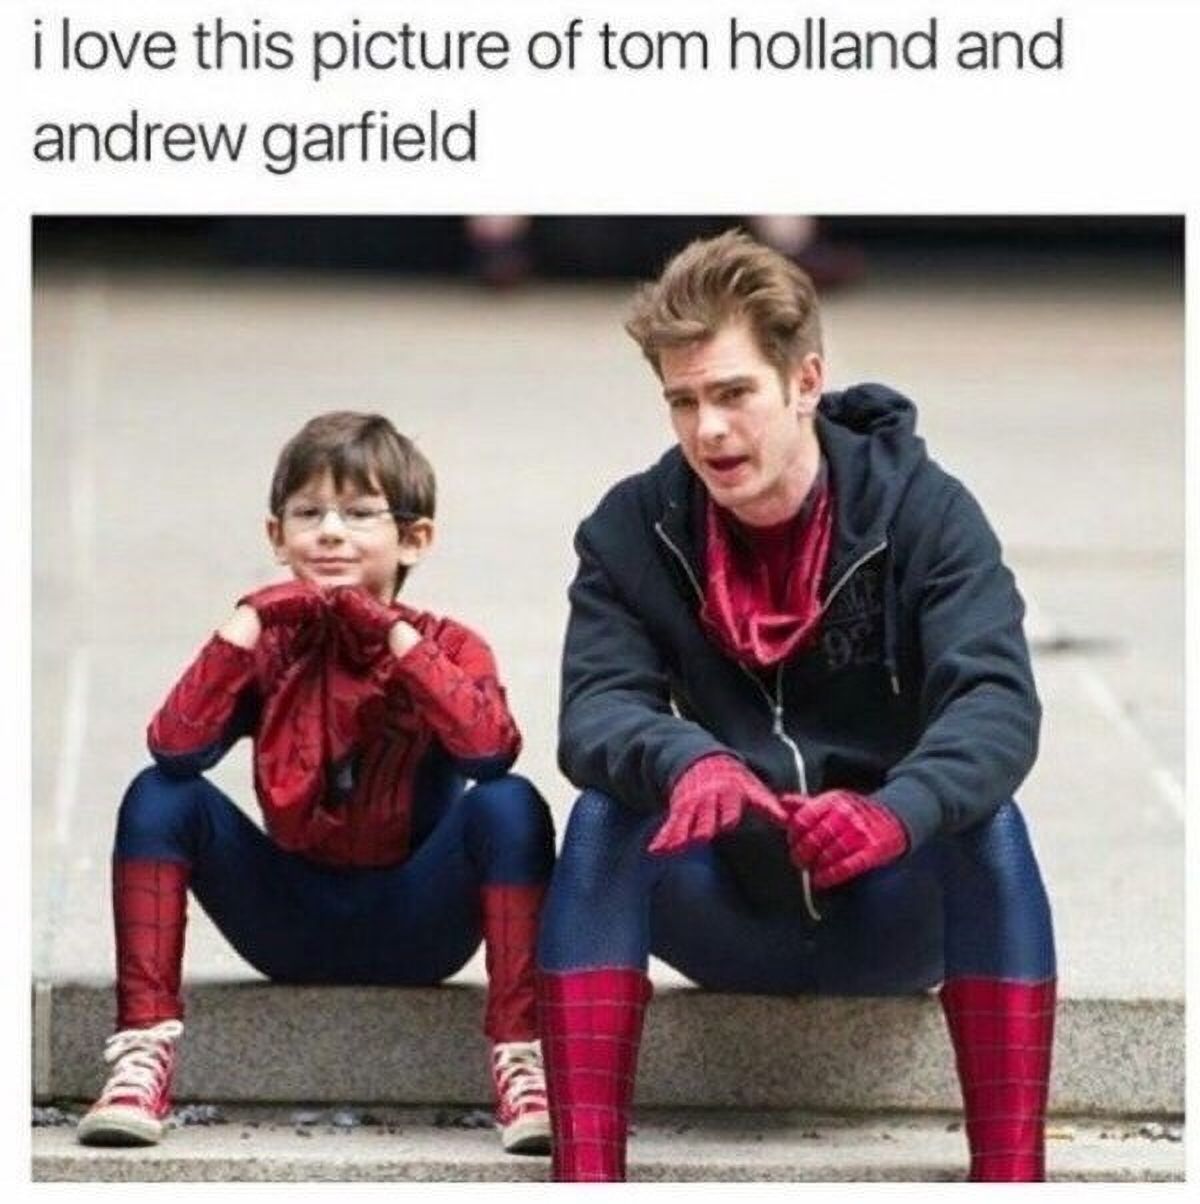 Andrew Garfield With Tom Holland